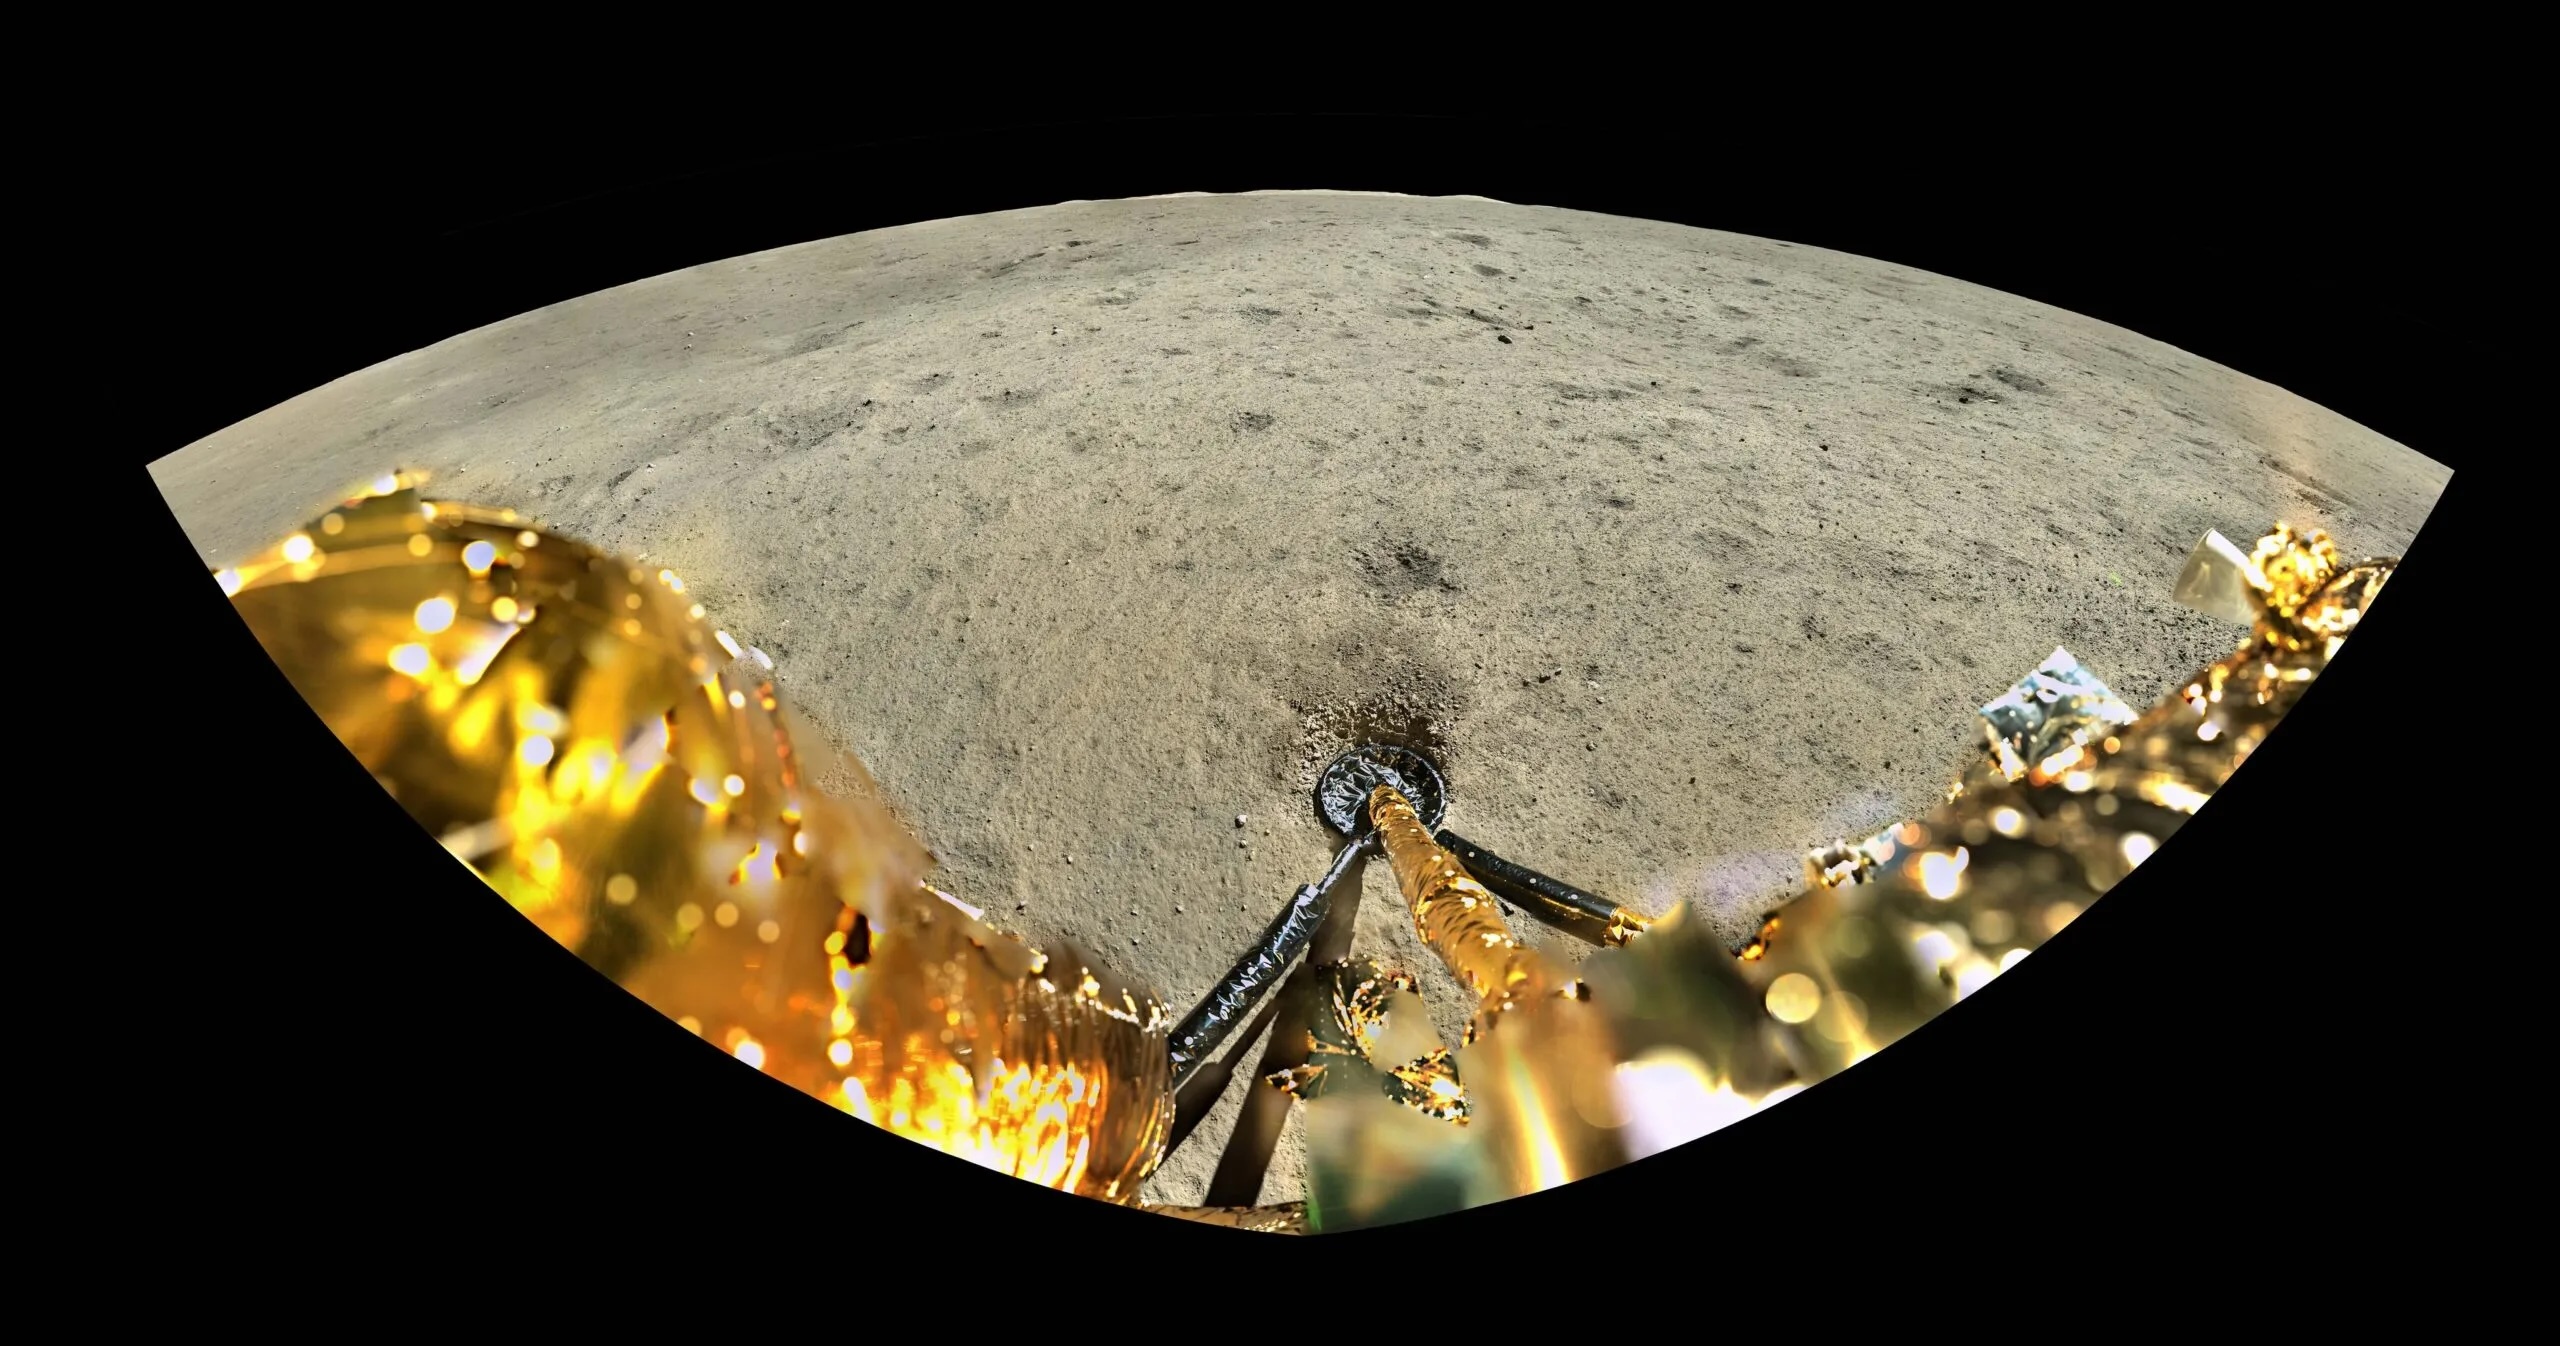 chang-e-6-landing-site-on-the-far-side-of-the-moon-scaled